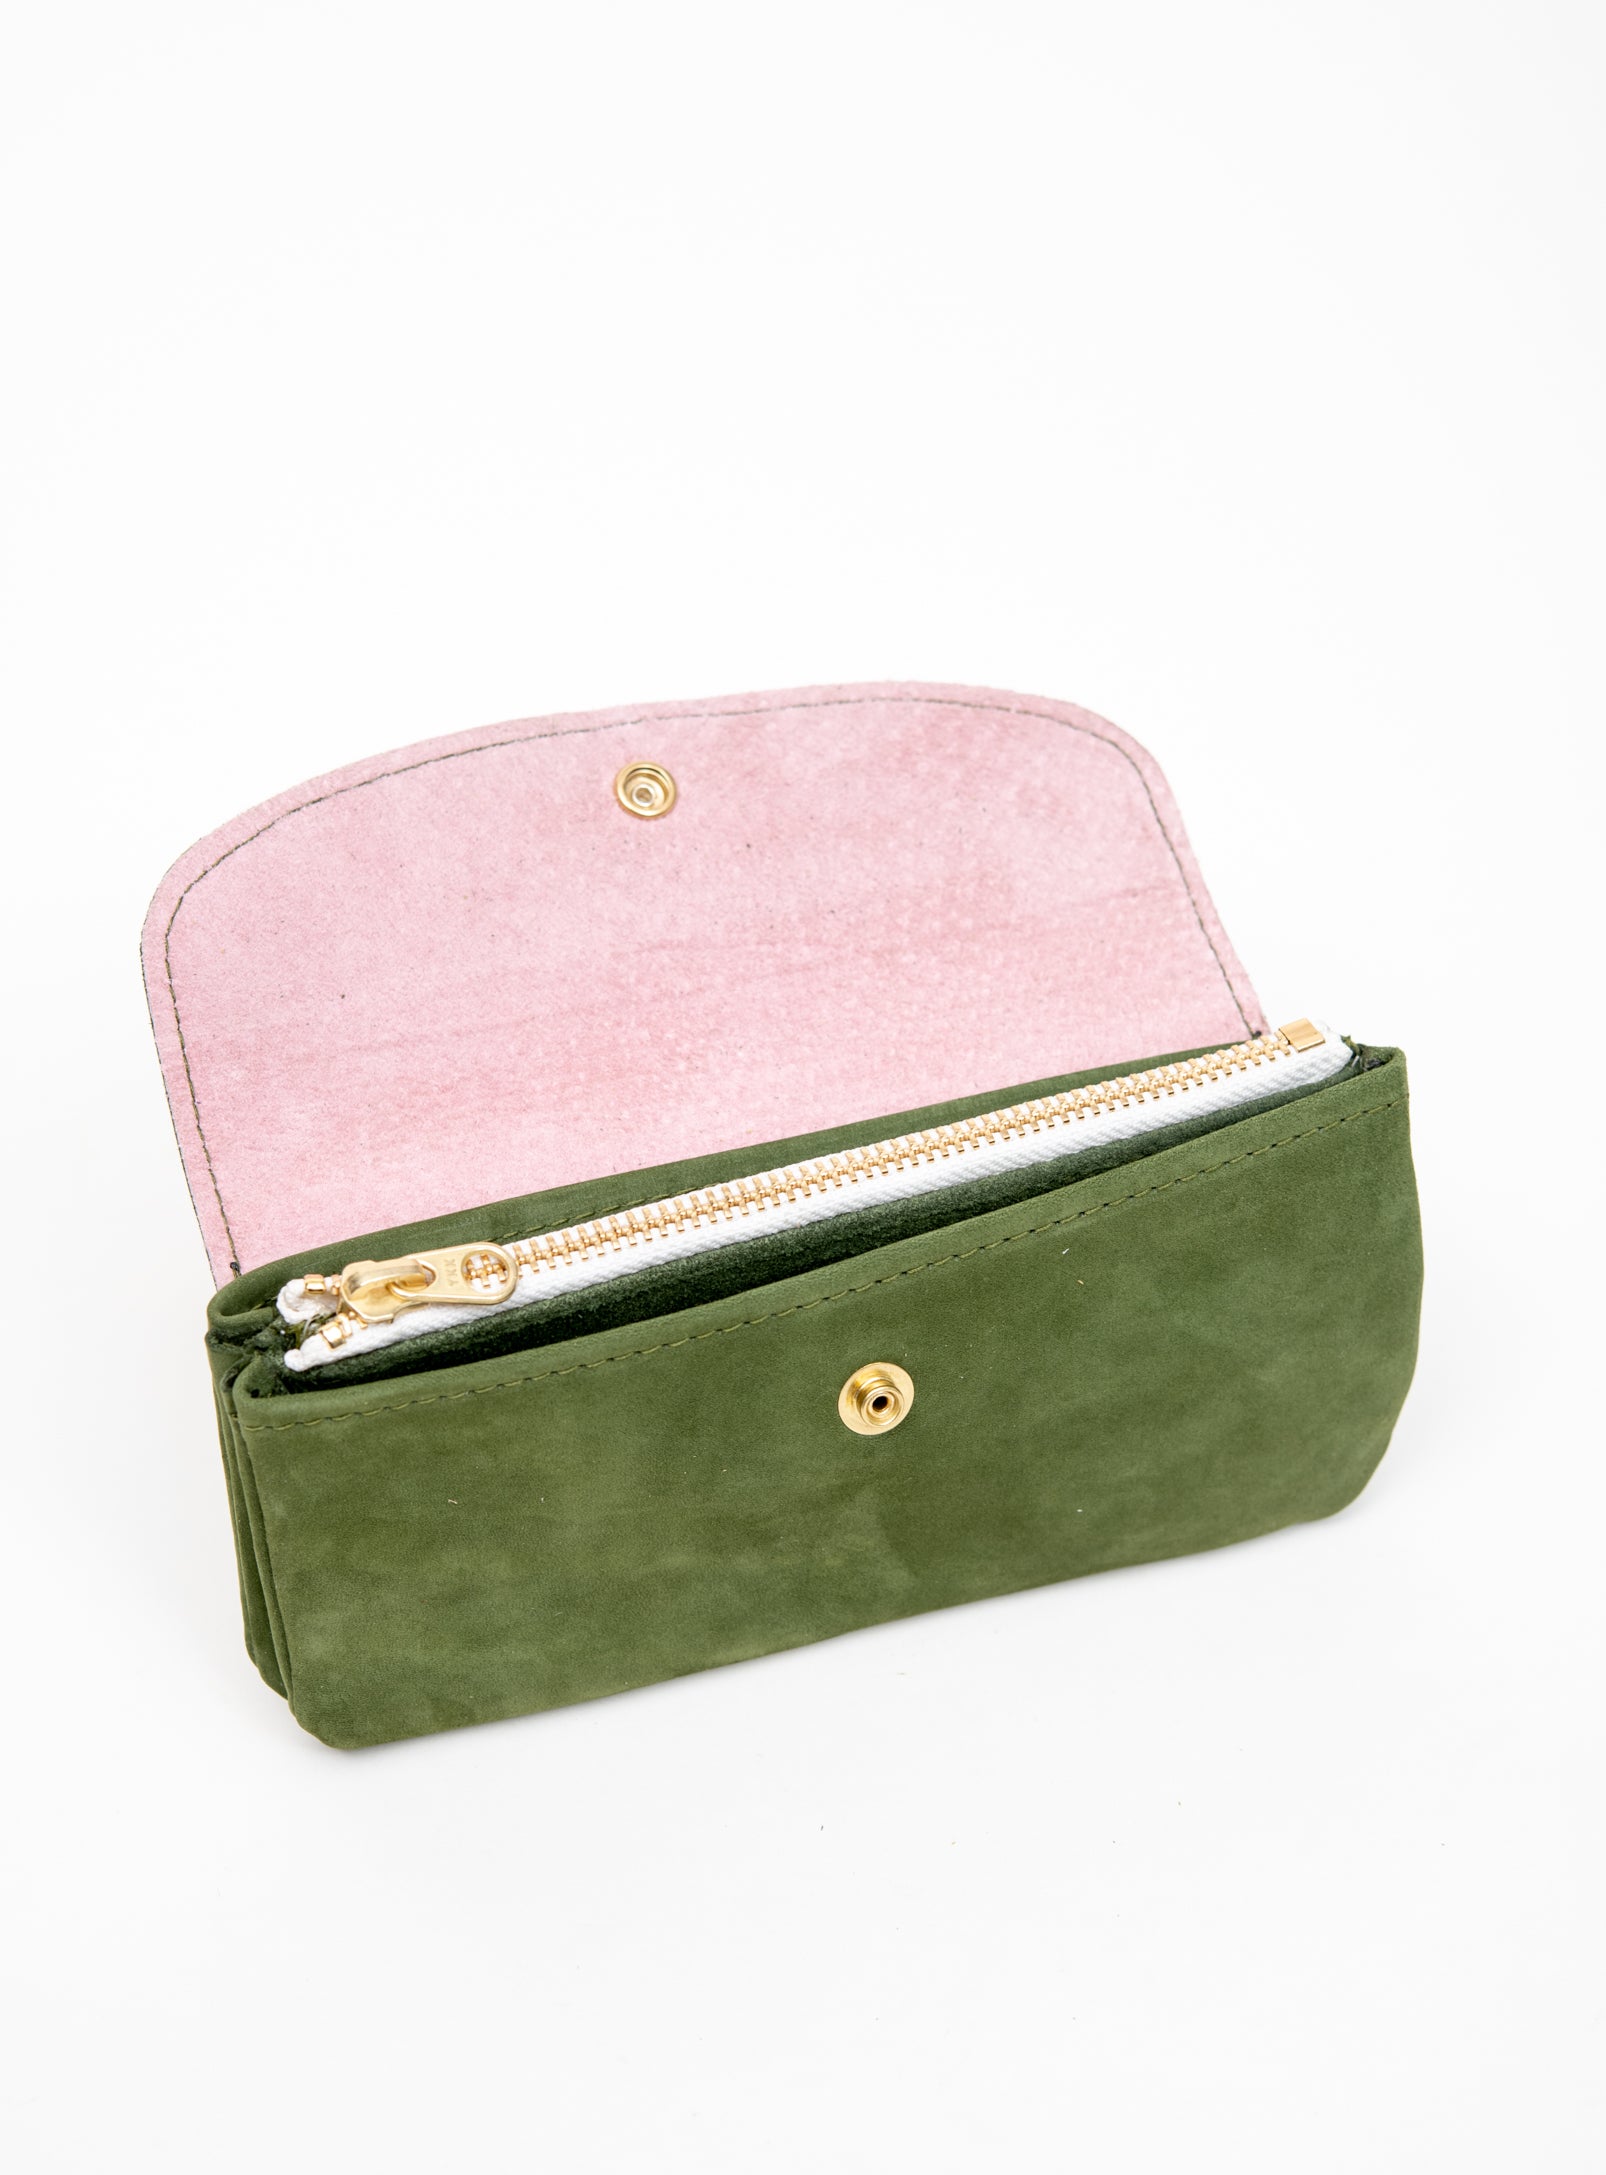 Veinage Minimalist green suede leather wallet MARQUETTE model